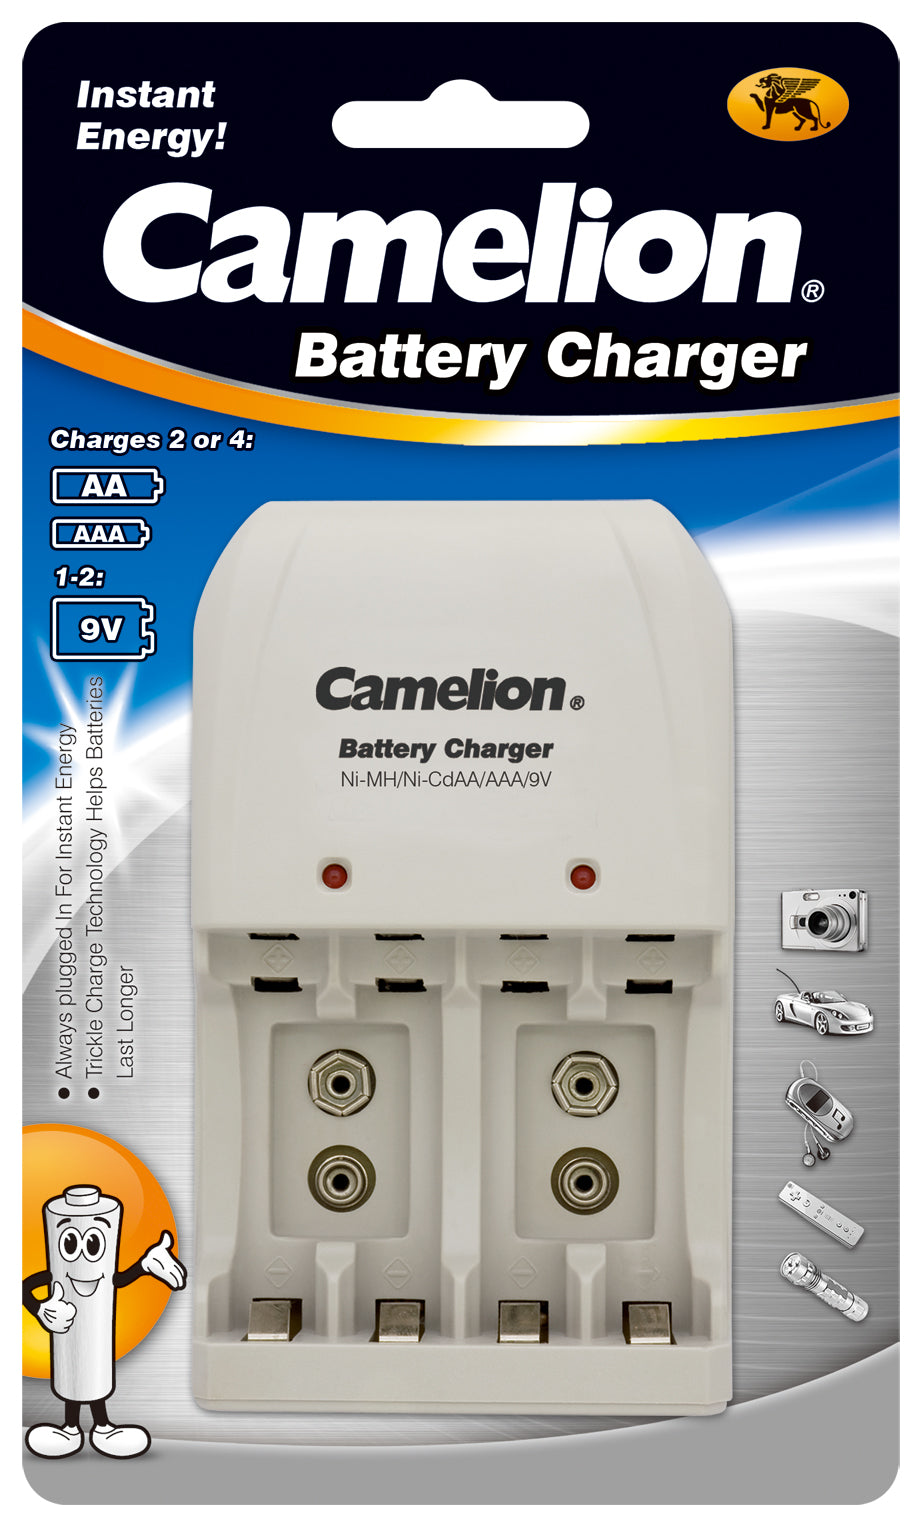 wholesale, wholesale battery chargers, battery chargers, AA battery charger, AAA battery charger, rechargeable battery charger, rechargeable battery dock, 9V battery charger